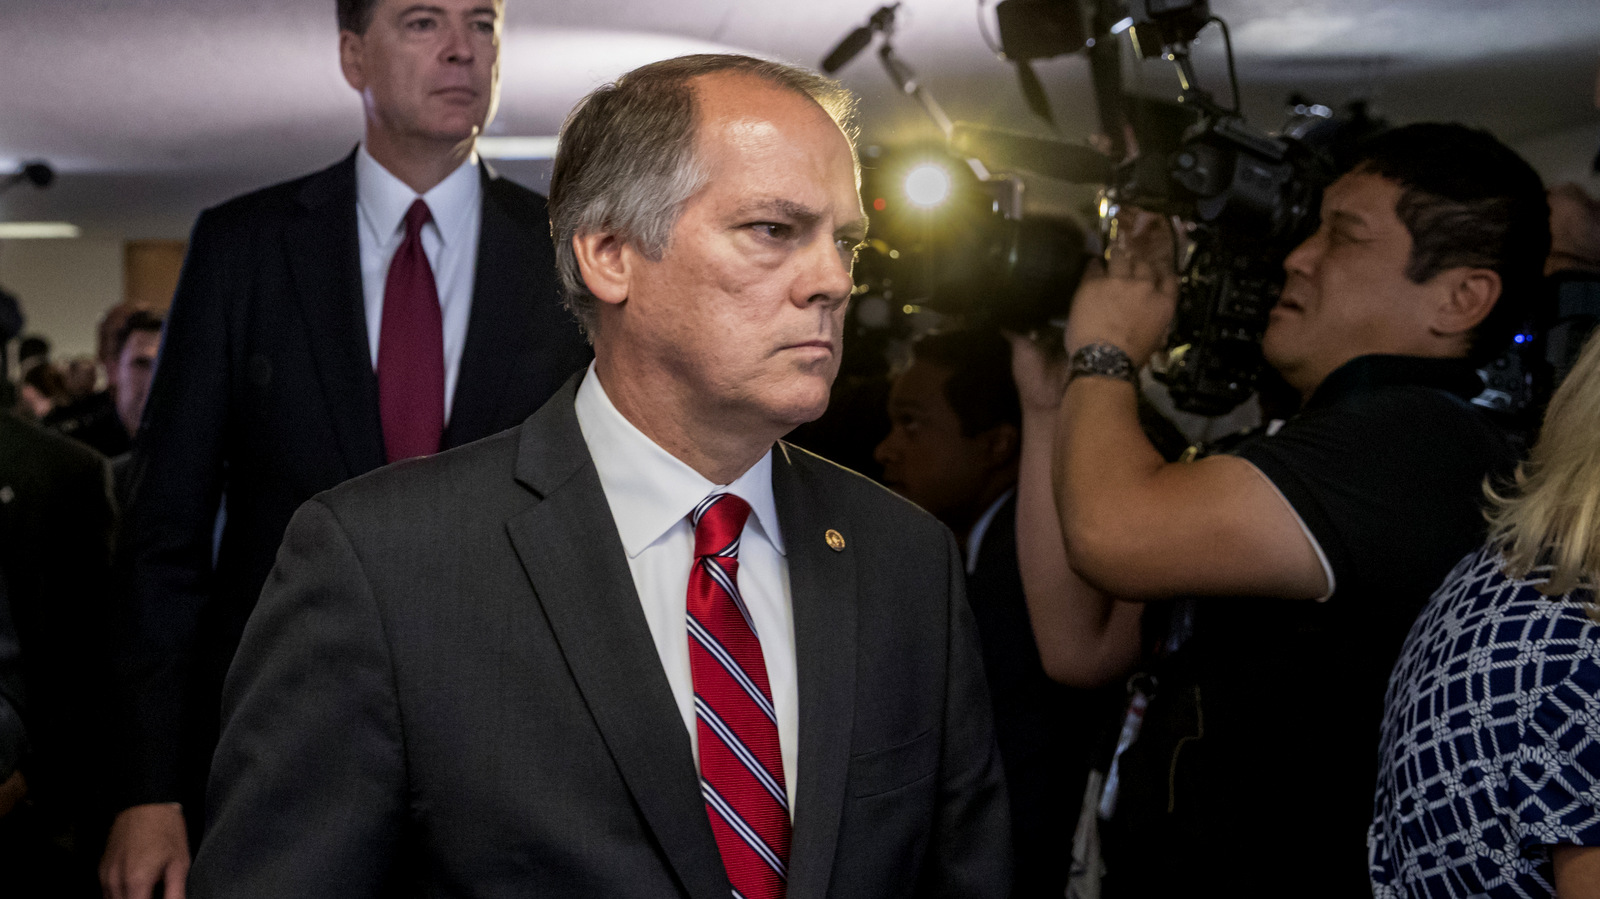 James Wolfe, center, former director of security with the Senate Intelligence Committee, escorts former FBI director James Comey to a secure room to continue his testimony on the 2016 election and his firing by President Donald Trump, on Capitol Hill in Washington,June 8, 2017. J. Scott Applewhite | AP